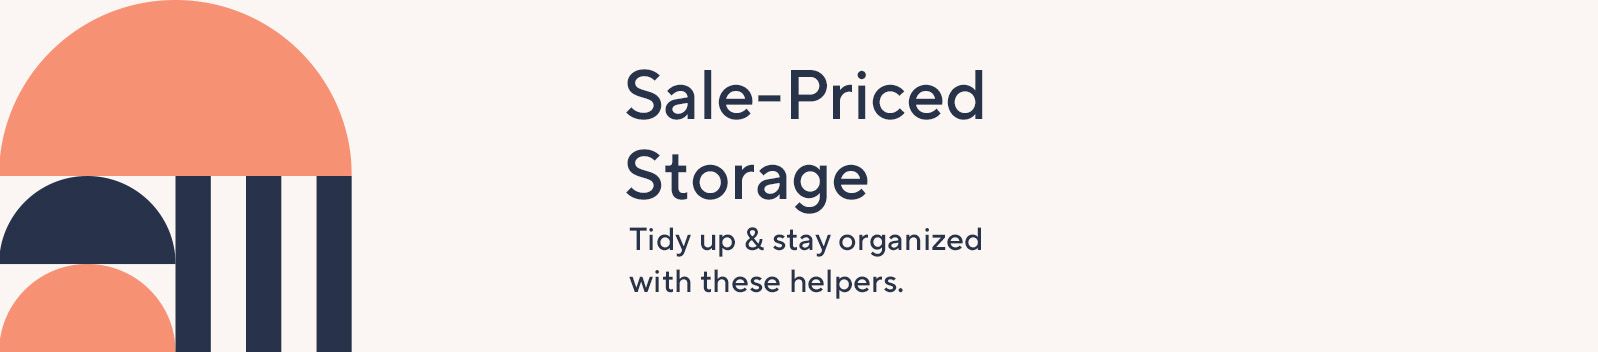 Sale-Priced Storage: Tidy up & stay organized with these helpers. 